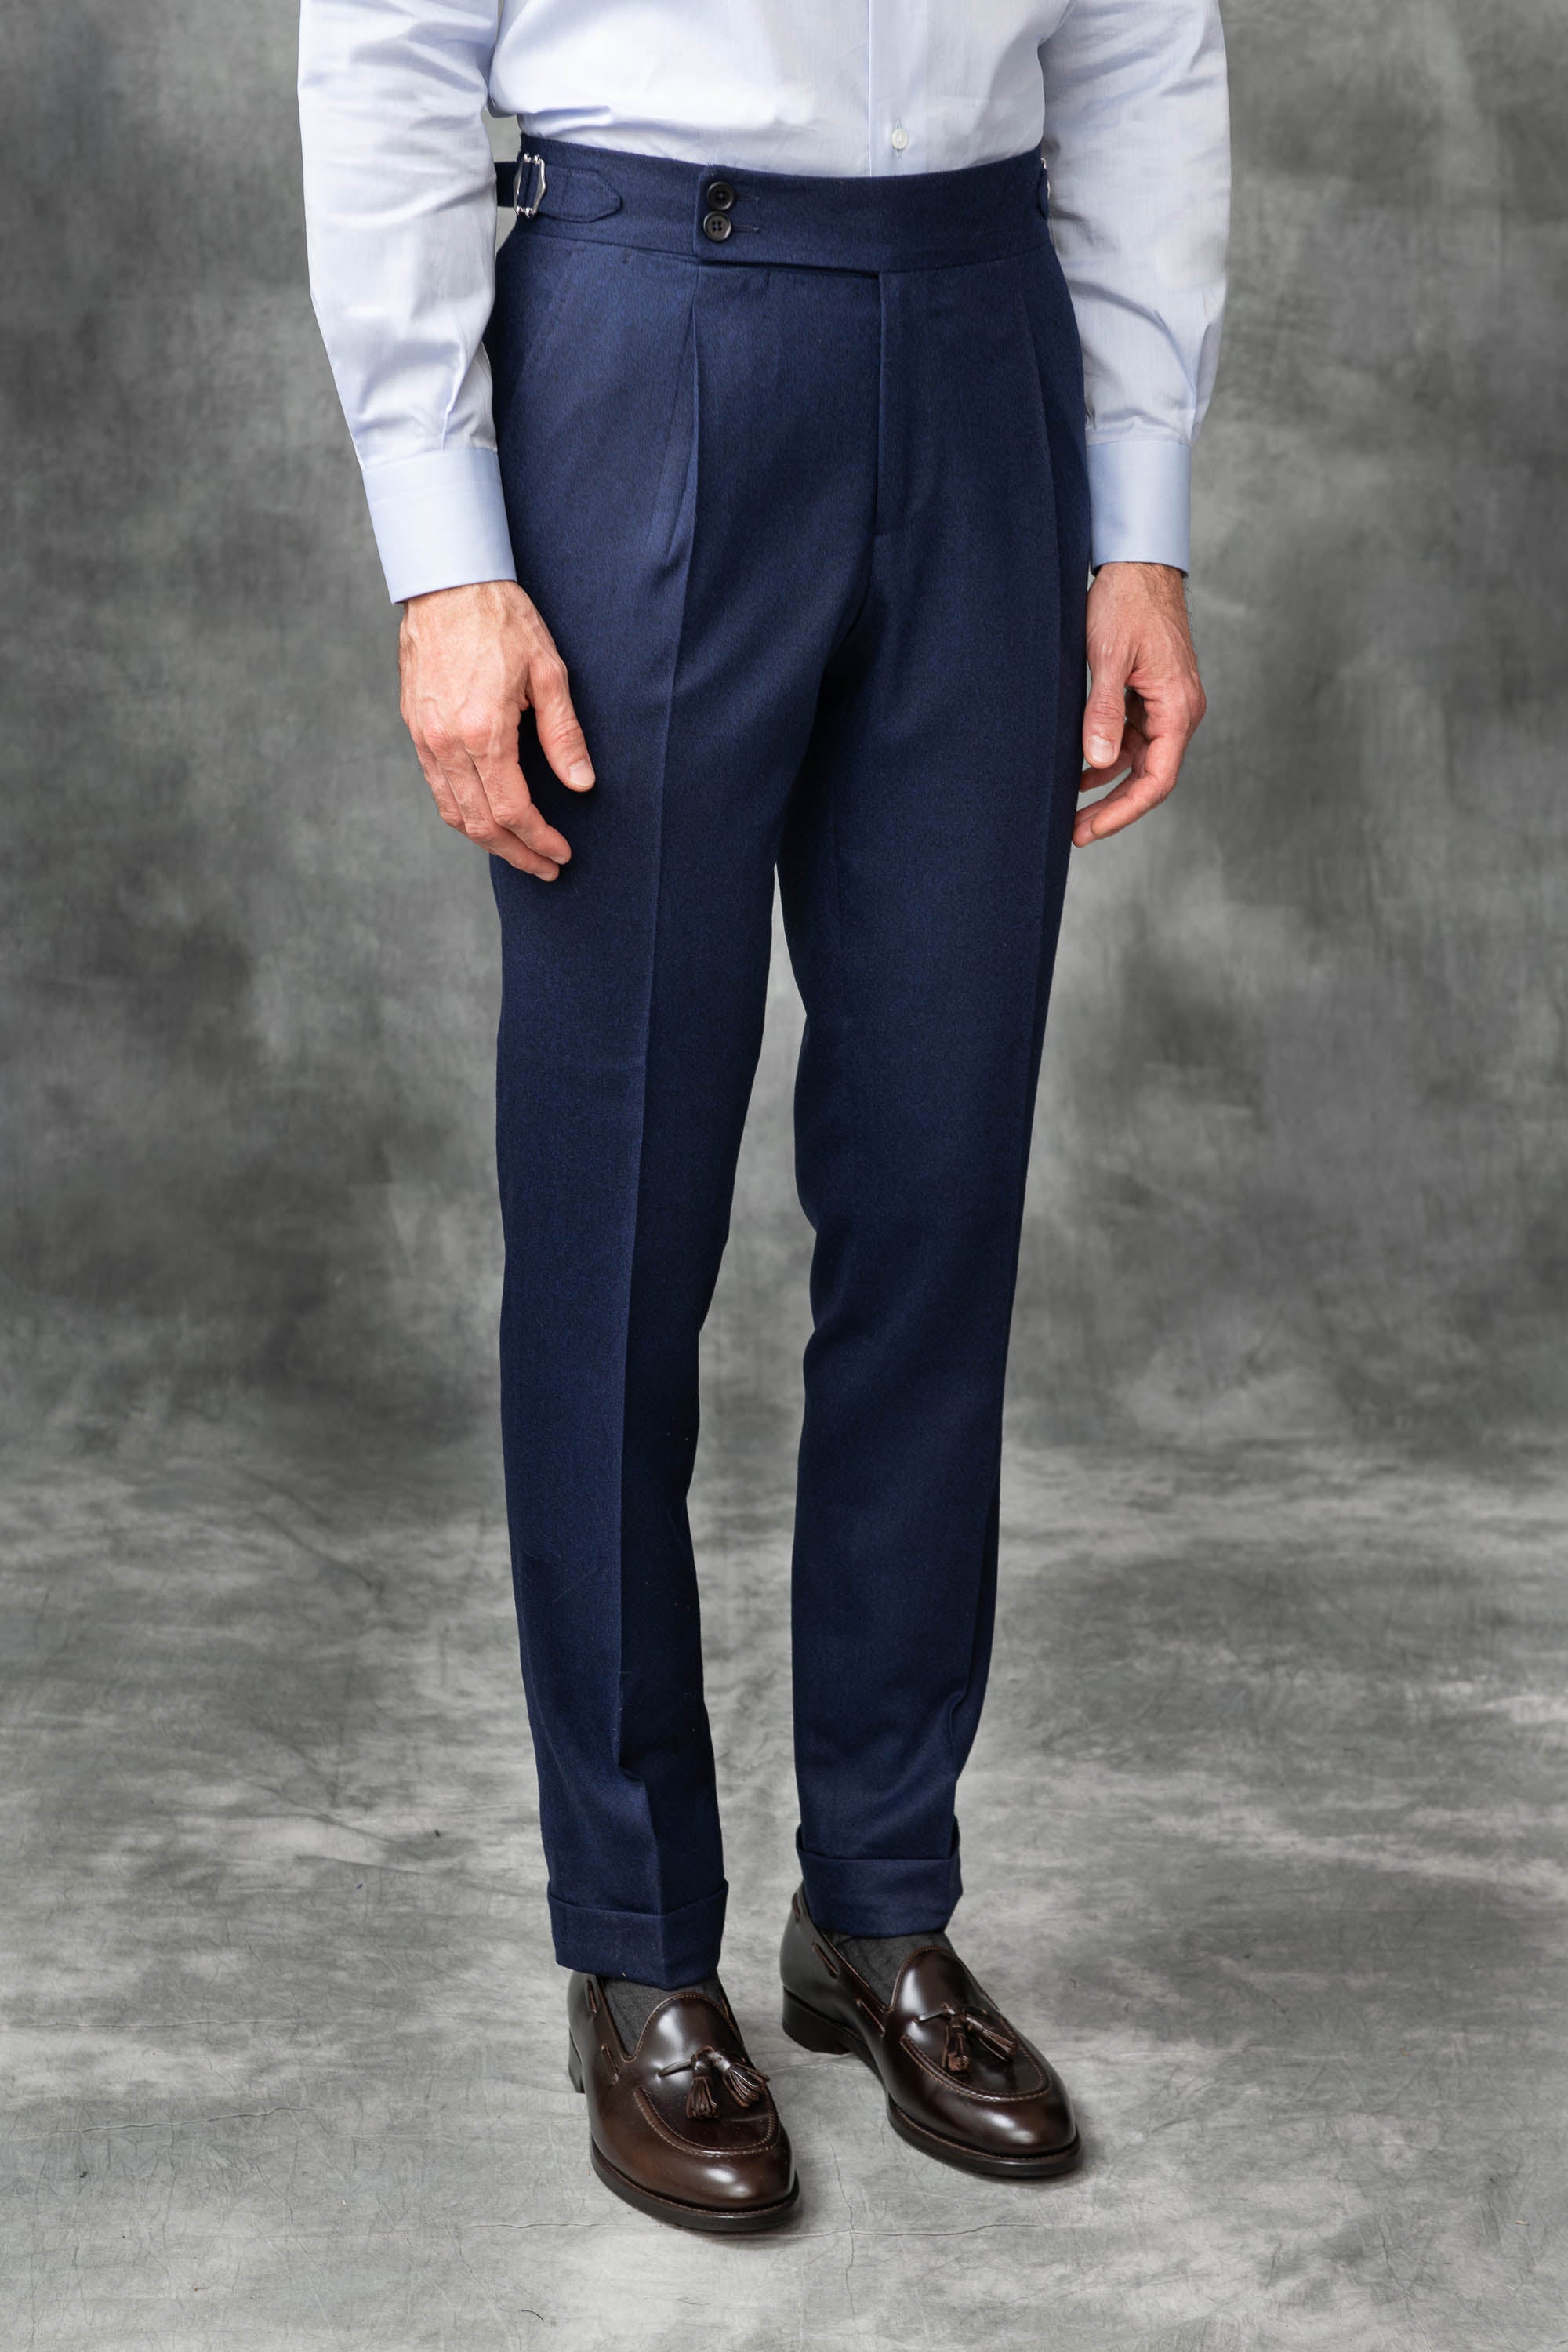 Flannel trousers,  blue trousers, sartorial trousers, italian style; pantalons en flanelle, pantalons bleu, pantalons sartoriaux, style italien , pantalons fabriqués en Italie, pantaloni in flanella, pantaloni blu, pantaloni sartoriali, stile italiano; pantaloni made in italy, winter trousers, chino trousers, pleated trousers, pantalon d'hiver, pantalon chino, pantalon à plis